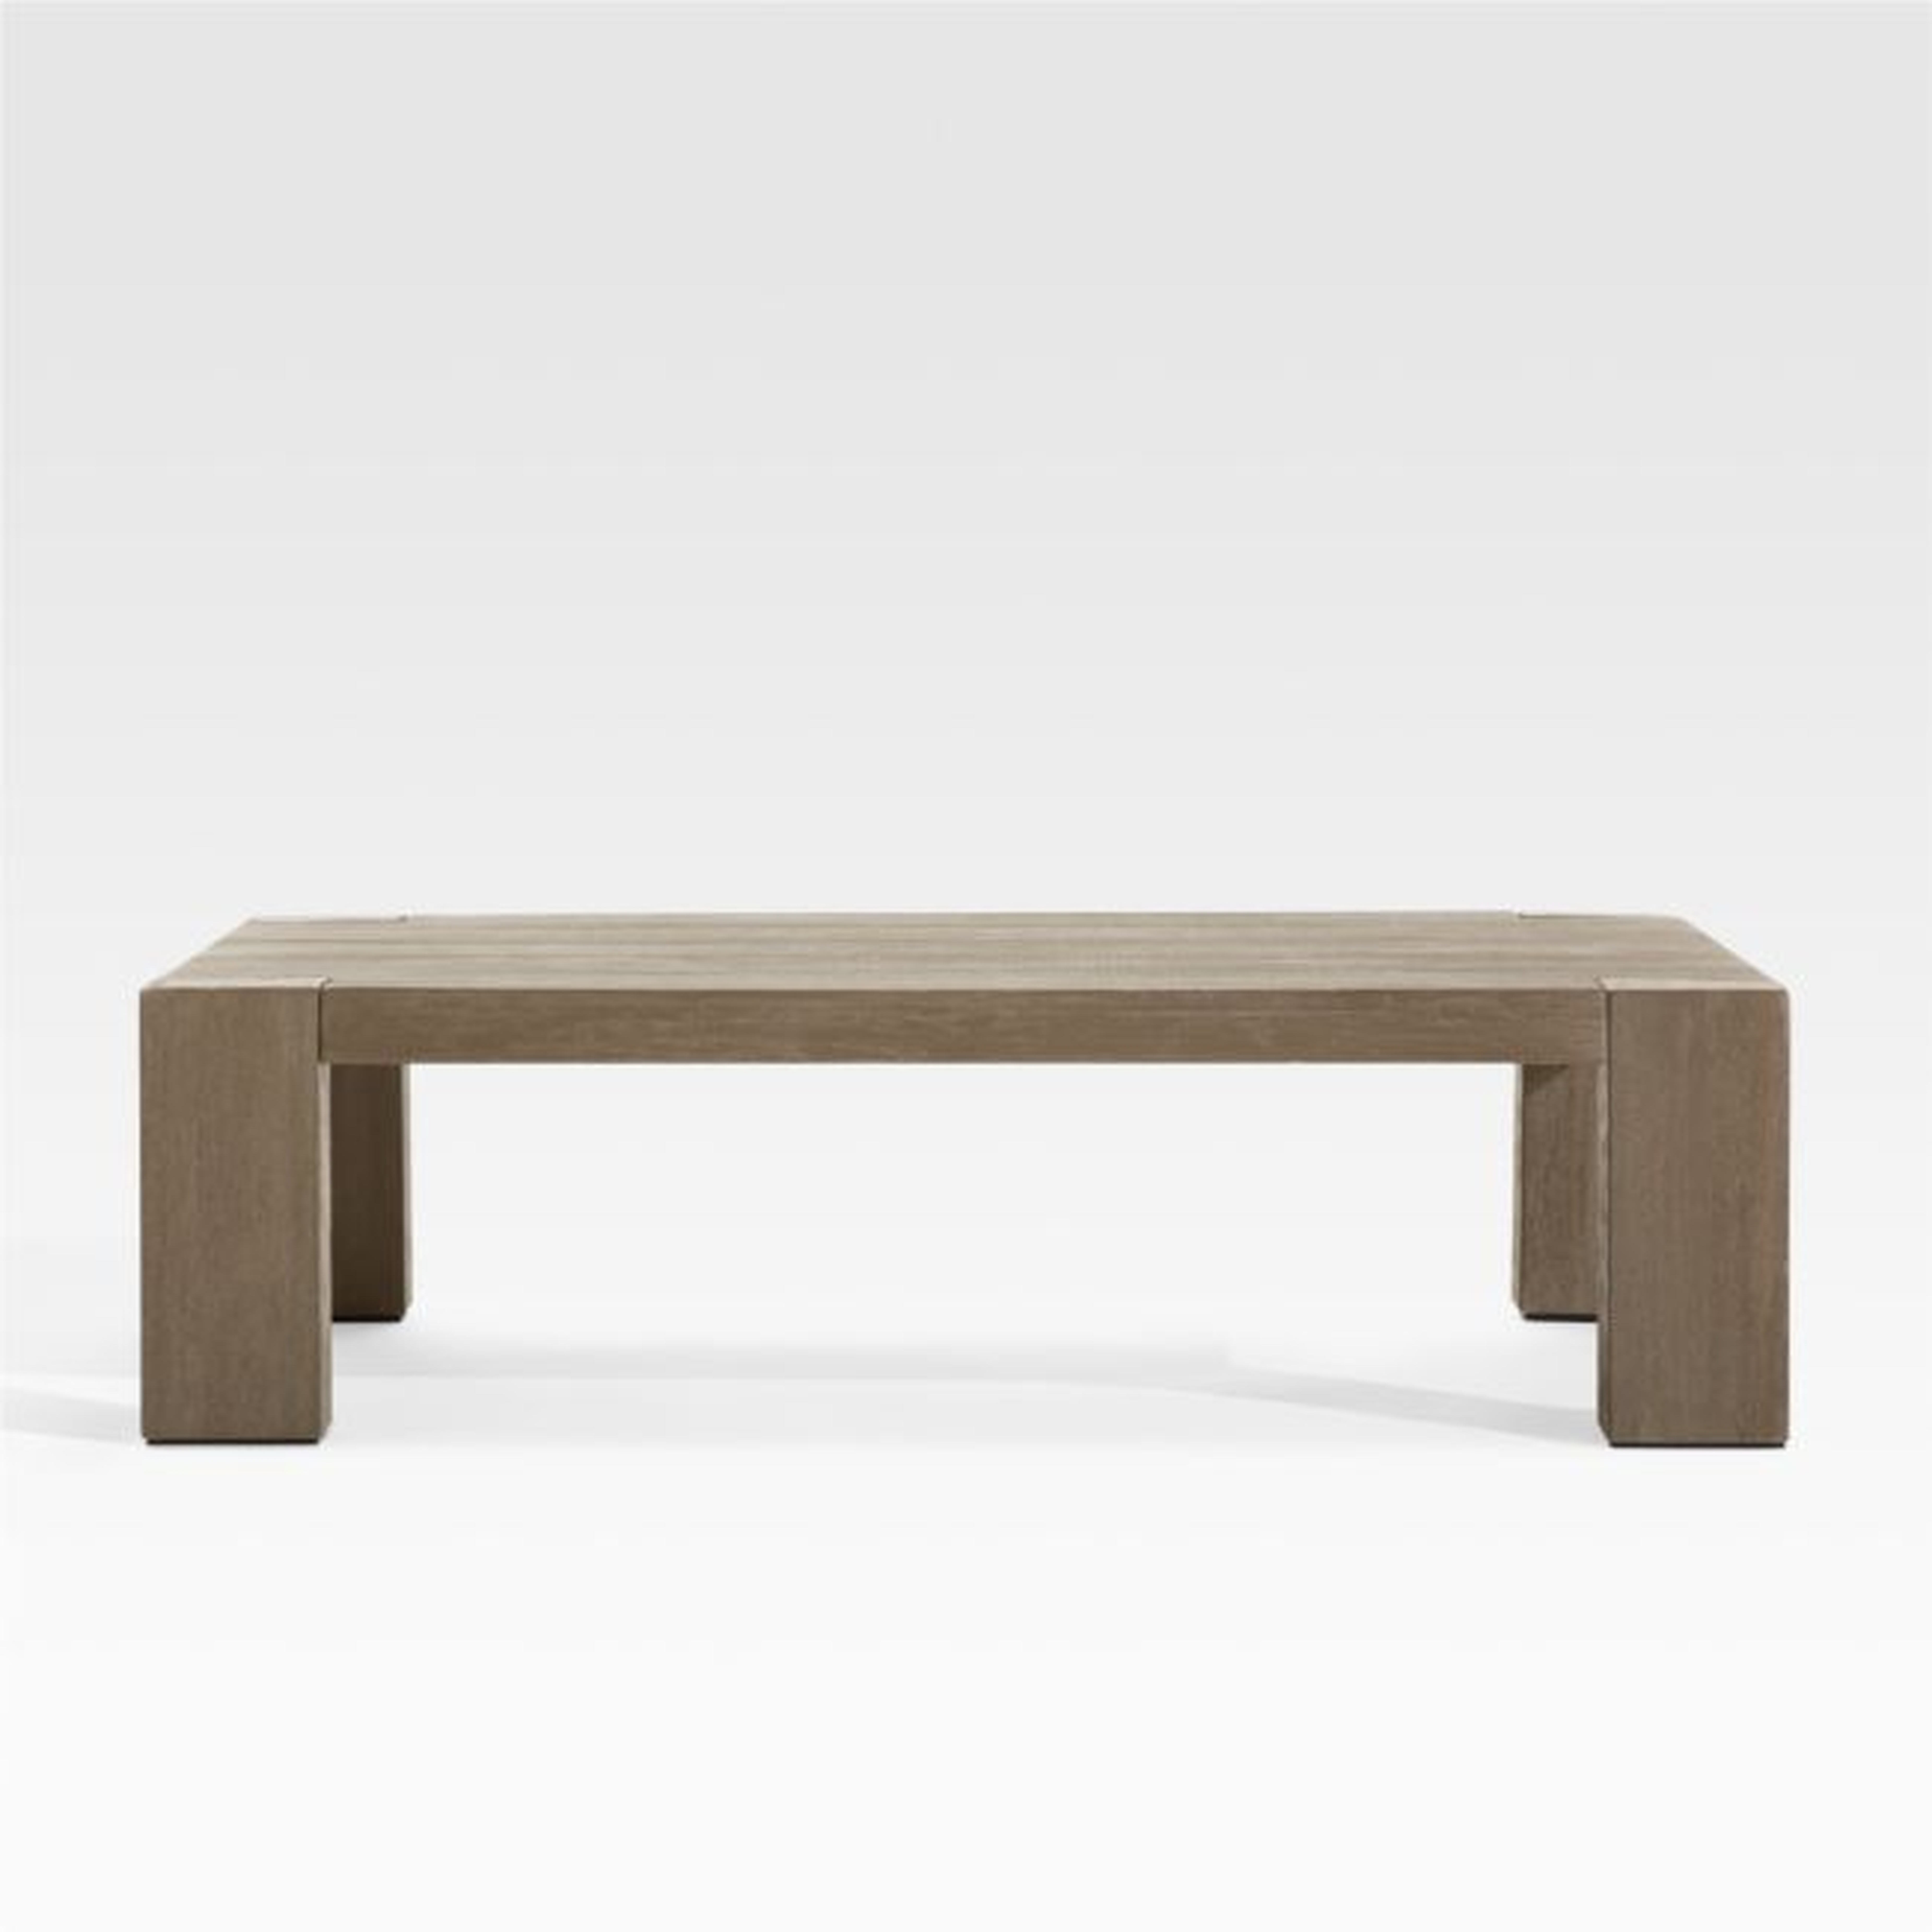 Ashore Grey Solid Mahogany Wood Outdoor Coffee Table - Crate and Barrel